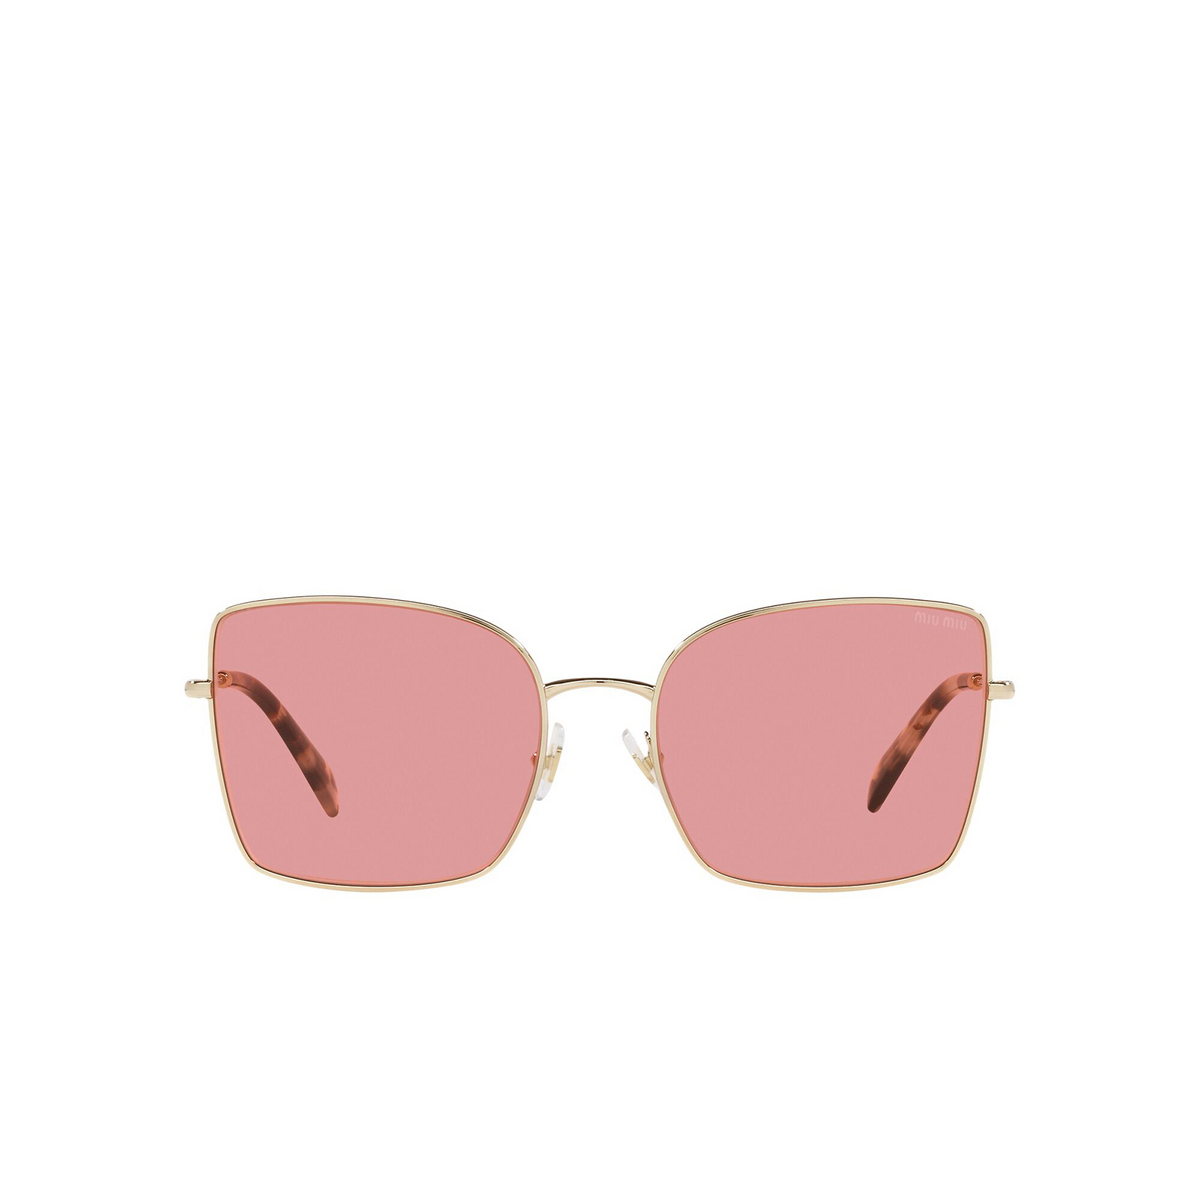 Miu Miu® Butterfly Sunglasses: MU 51WS color Pale Gold ZVN08P - front view.